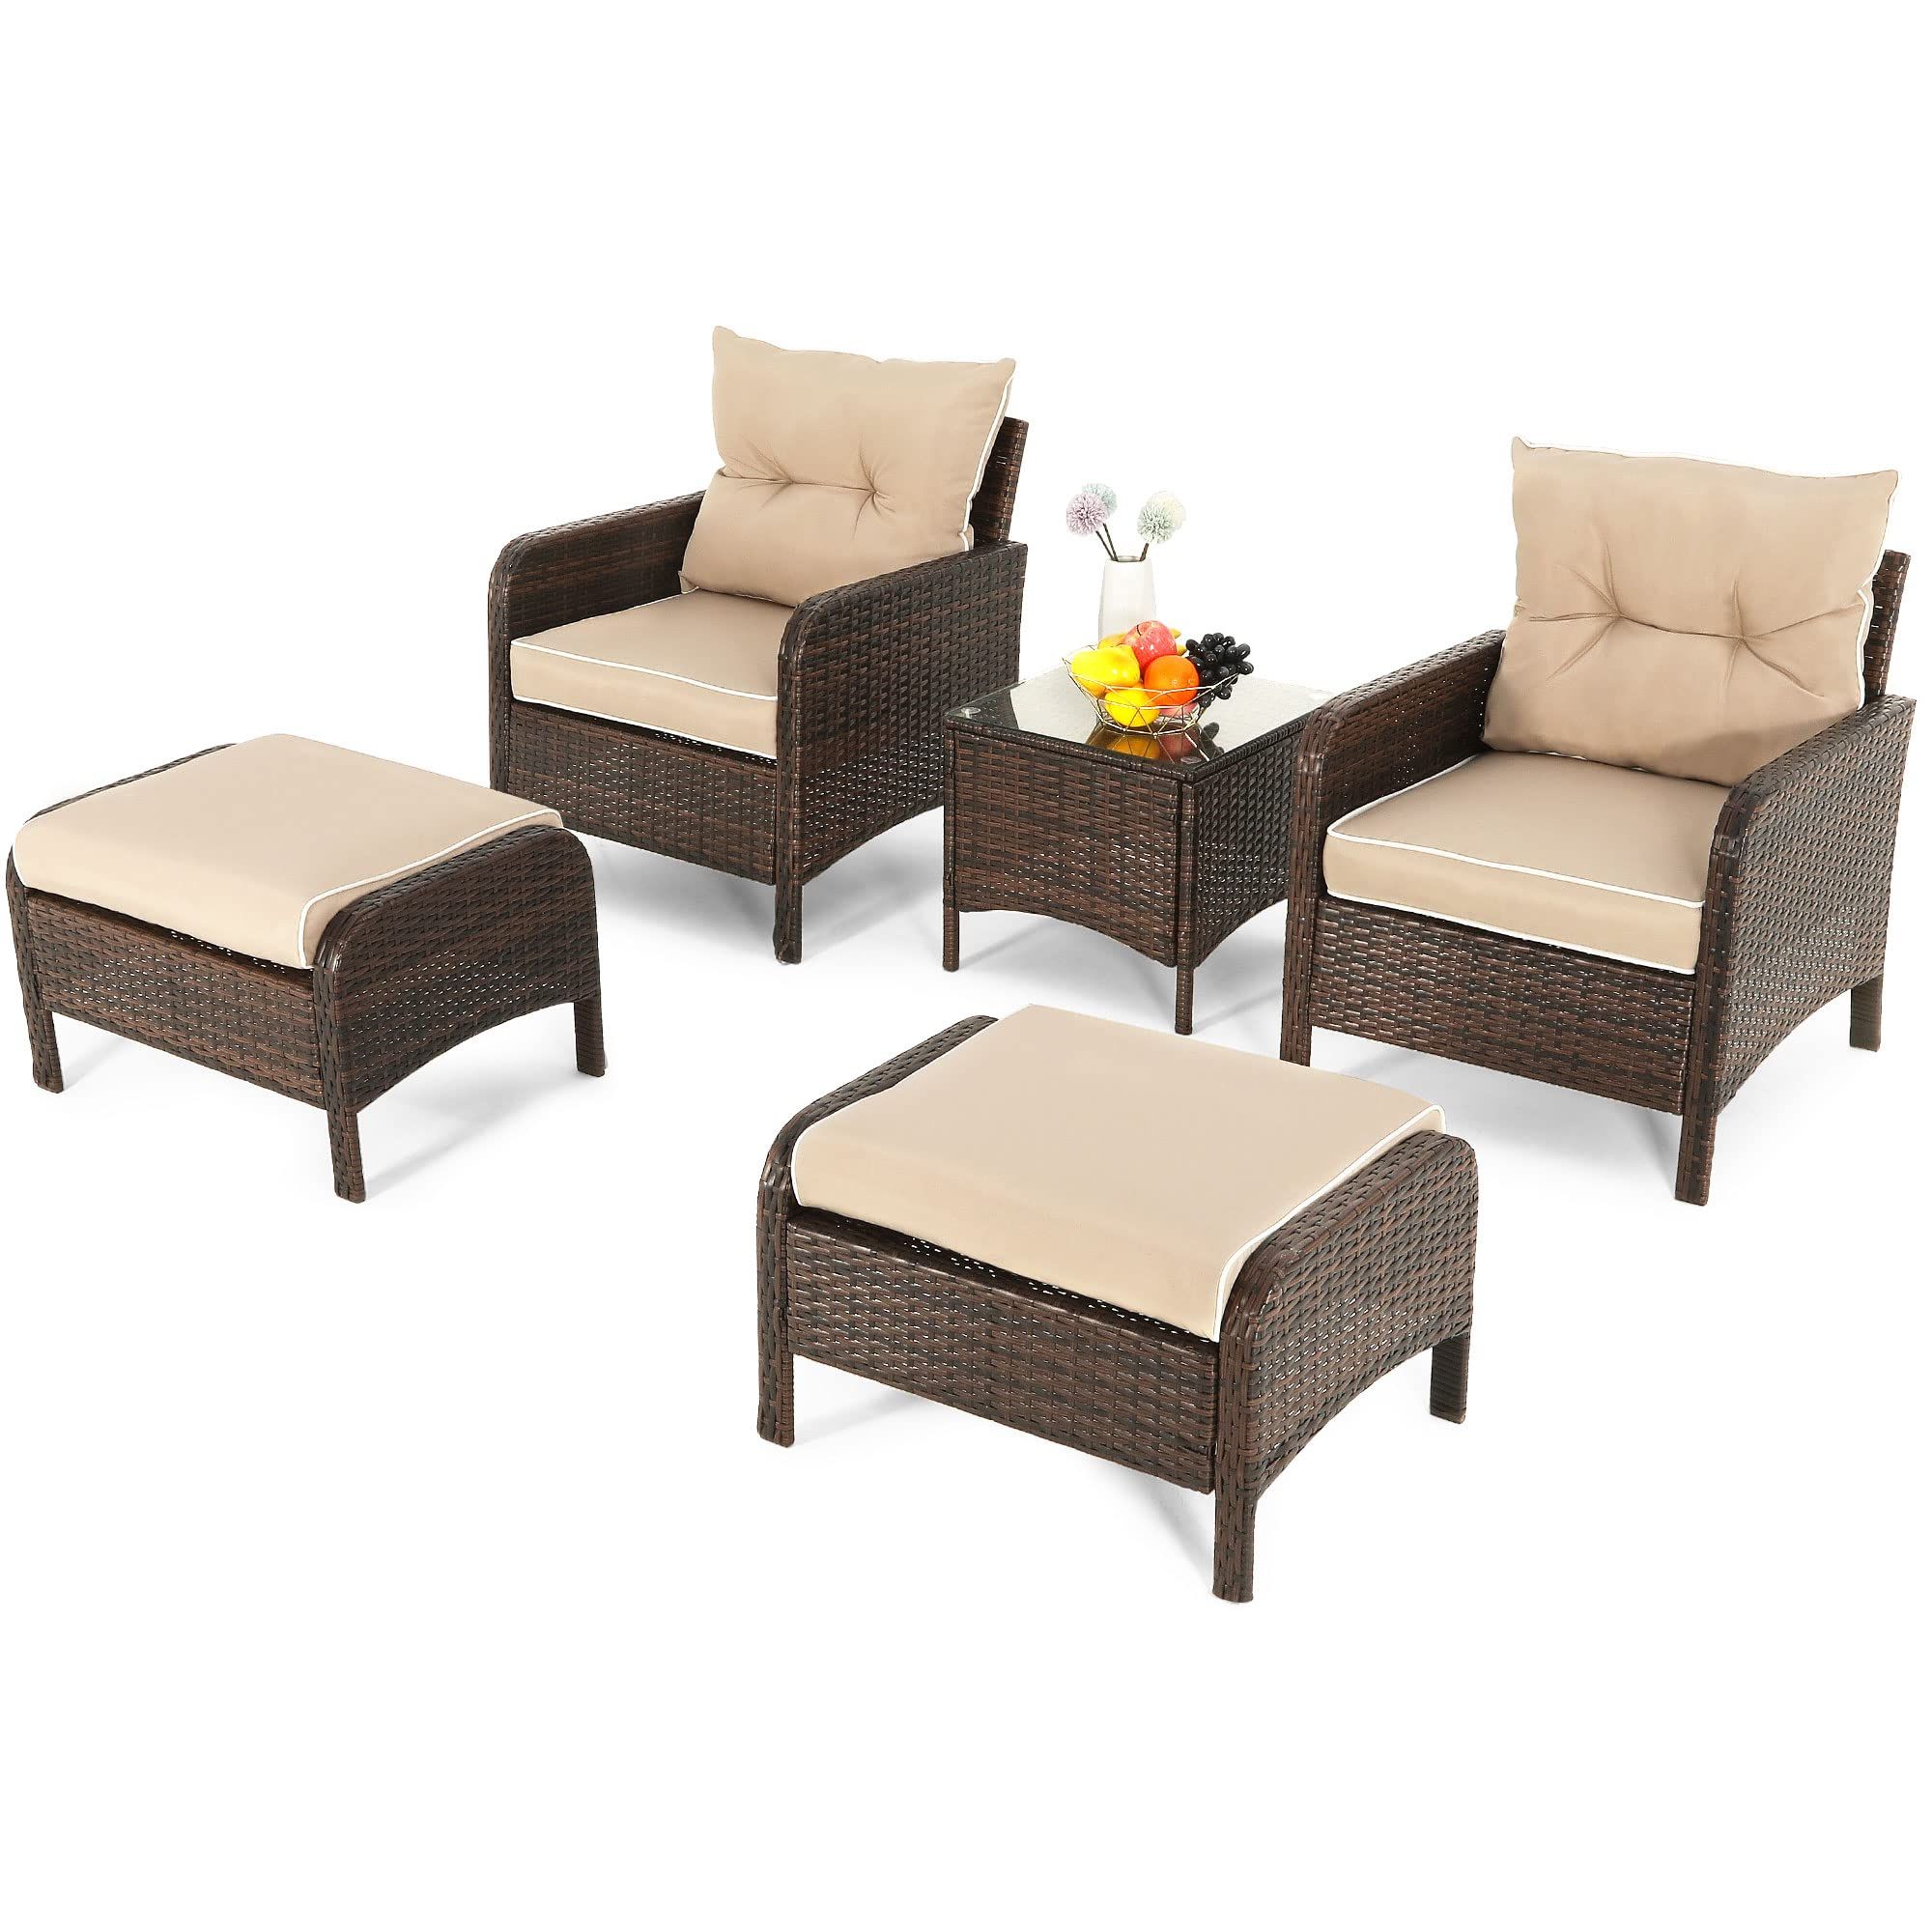 Brown Wicker Chairs With Ottoman Intended For Trendy Amazon: Yitahome 5 Piece Wicker Patio Furniture Set, Patio Set Porch Furniture  Outdoor Lounge Chair With Ottoman And Side Table, Brown : Patio, Lawn &  Garden (Photo 4 of 15)